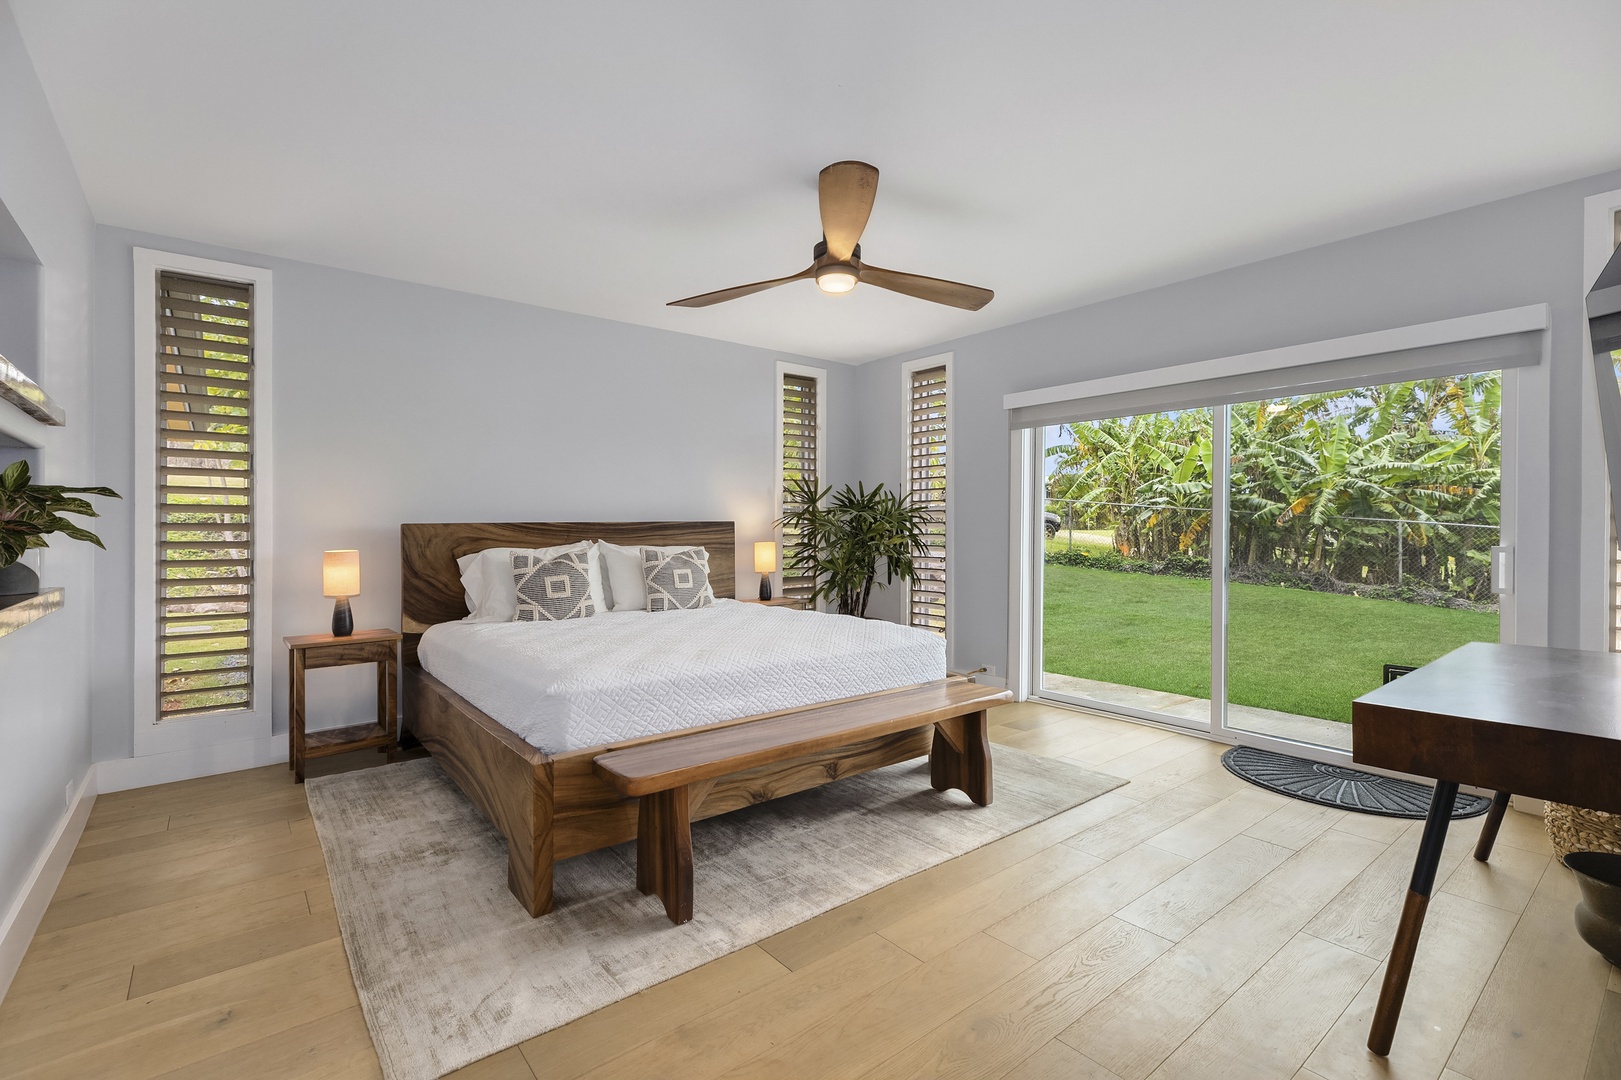 Haleiwa Vacation Rentals, Hale Mahina - Primary bedroom with king sized bed, study desk, and smart TV